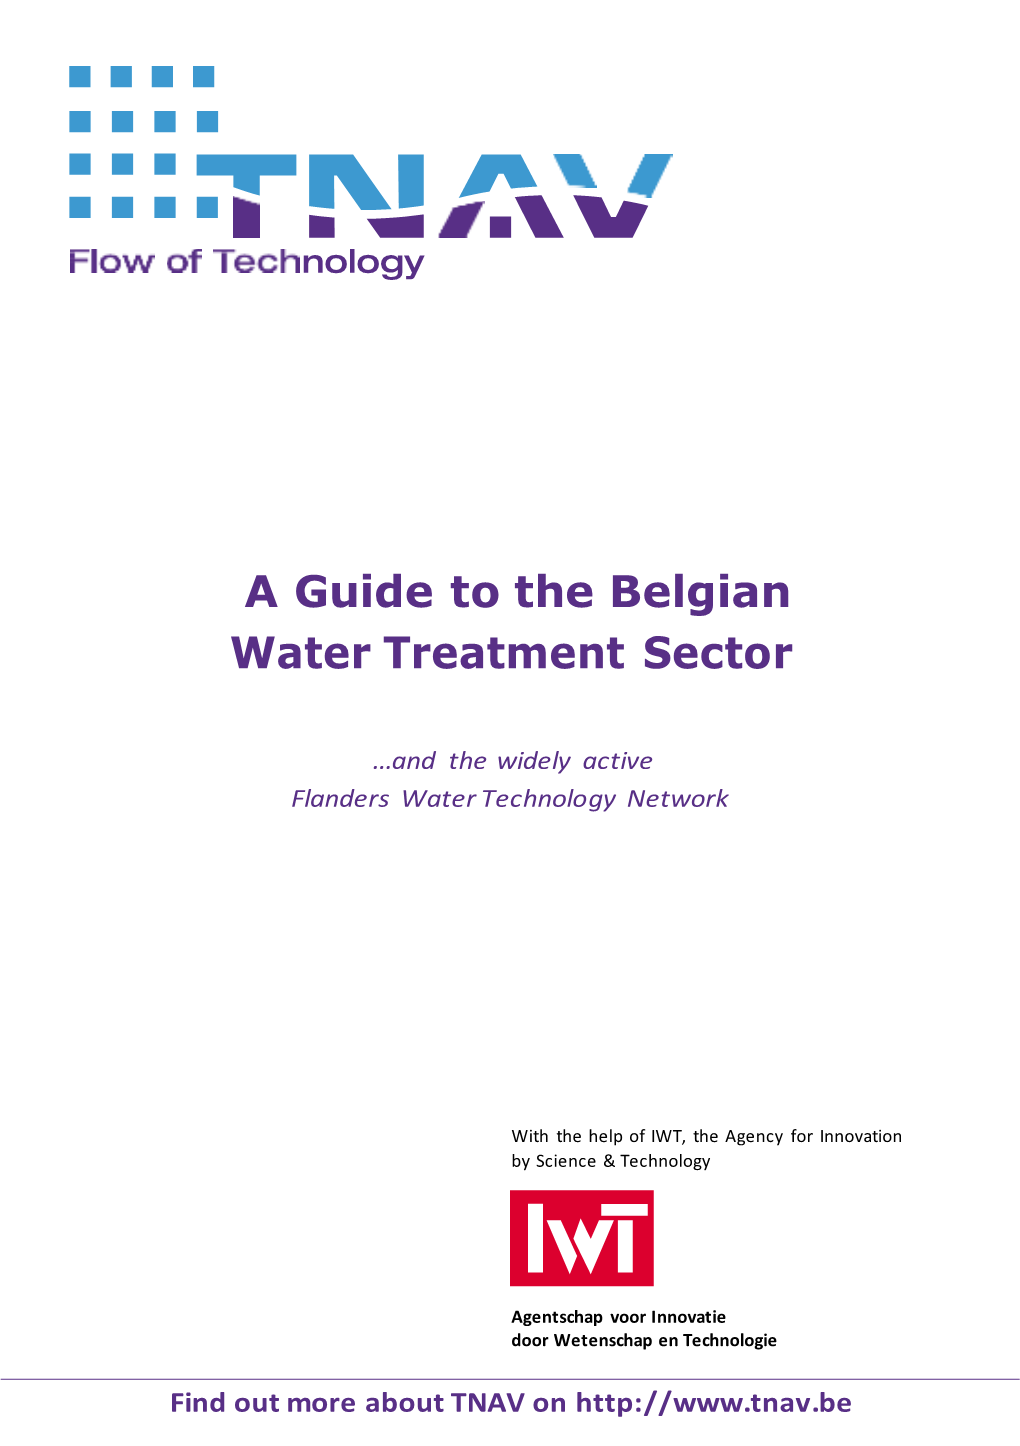 A Guide to the Belgian Water Treatment Sector